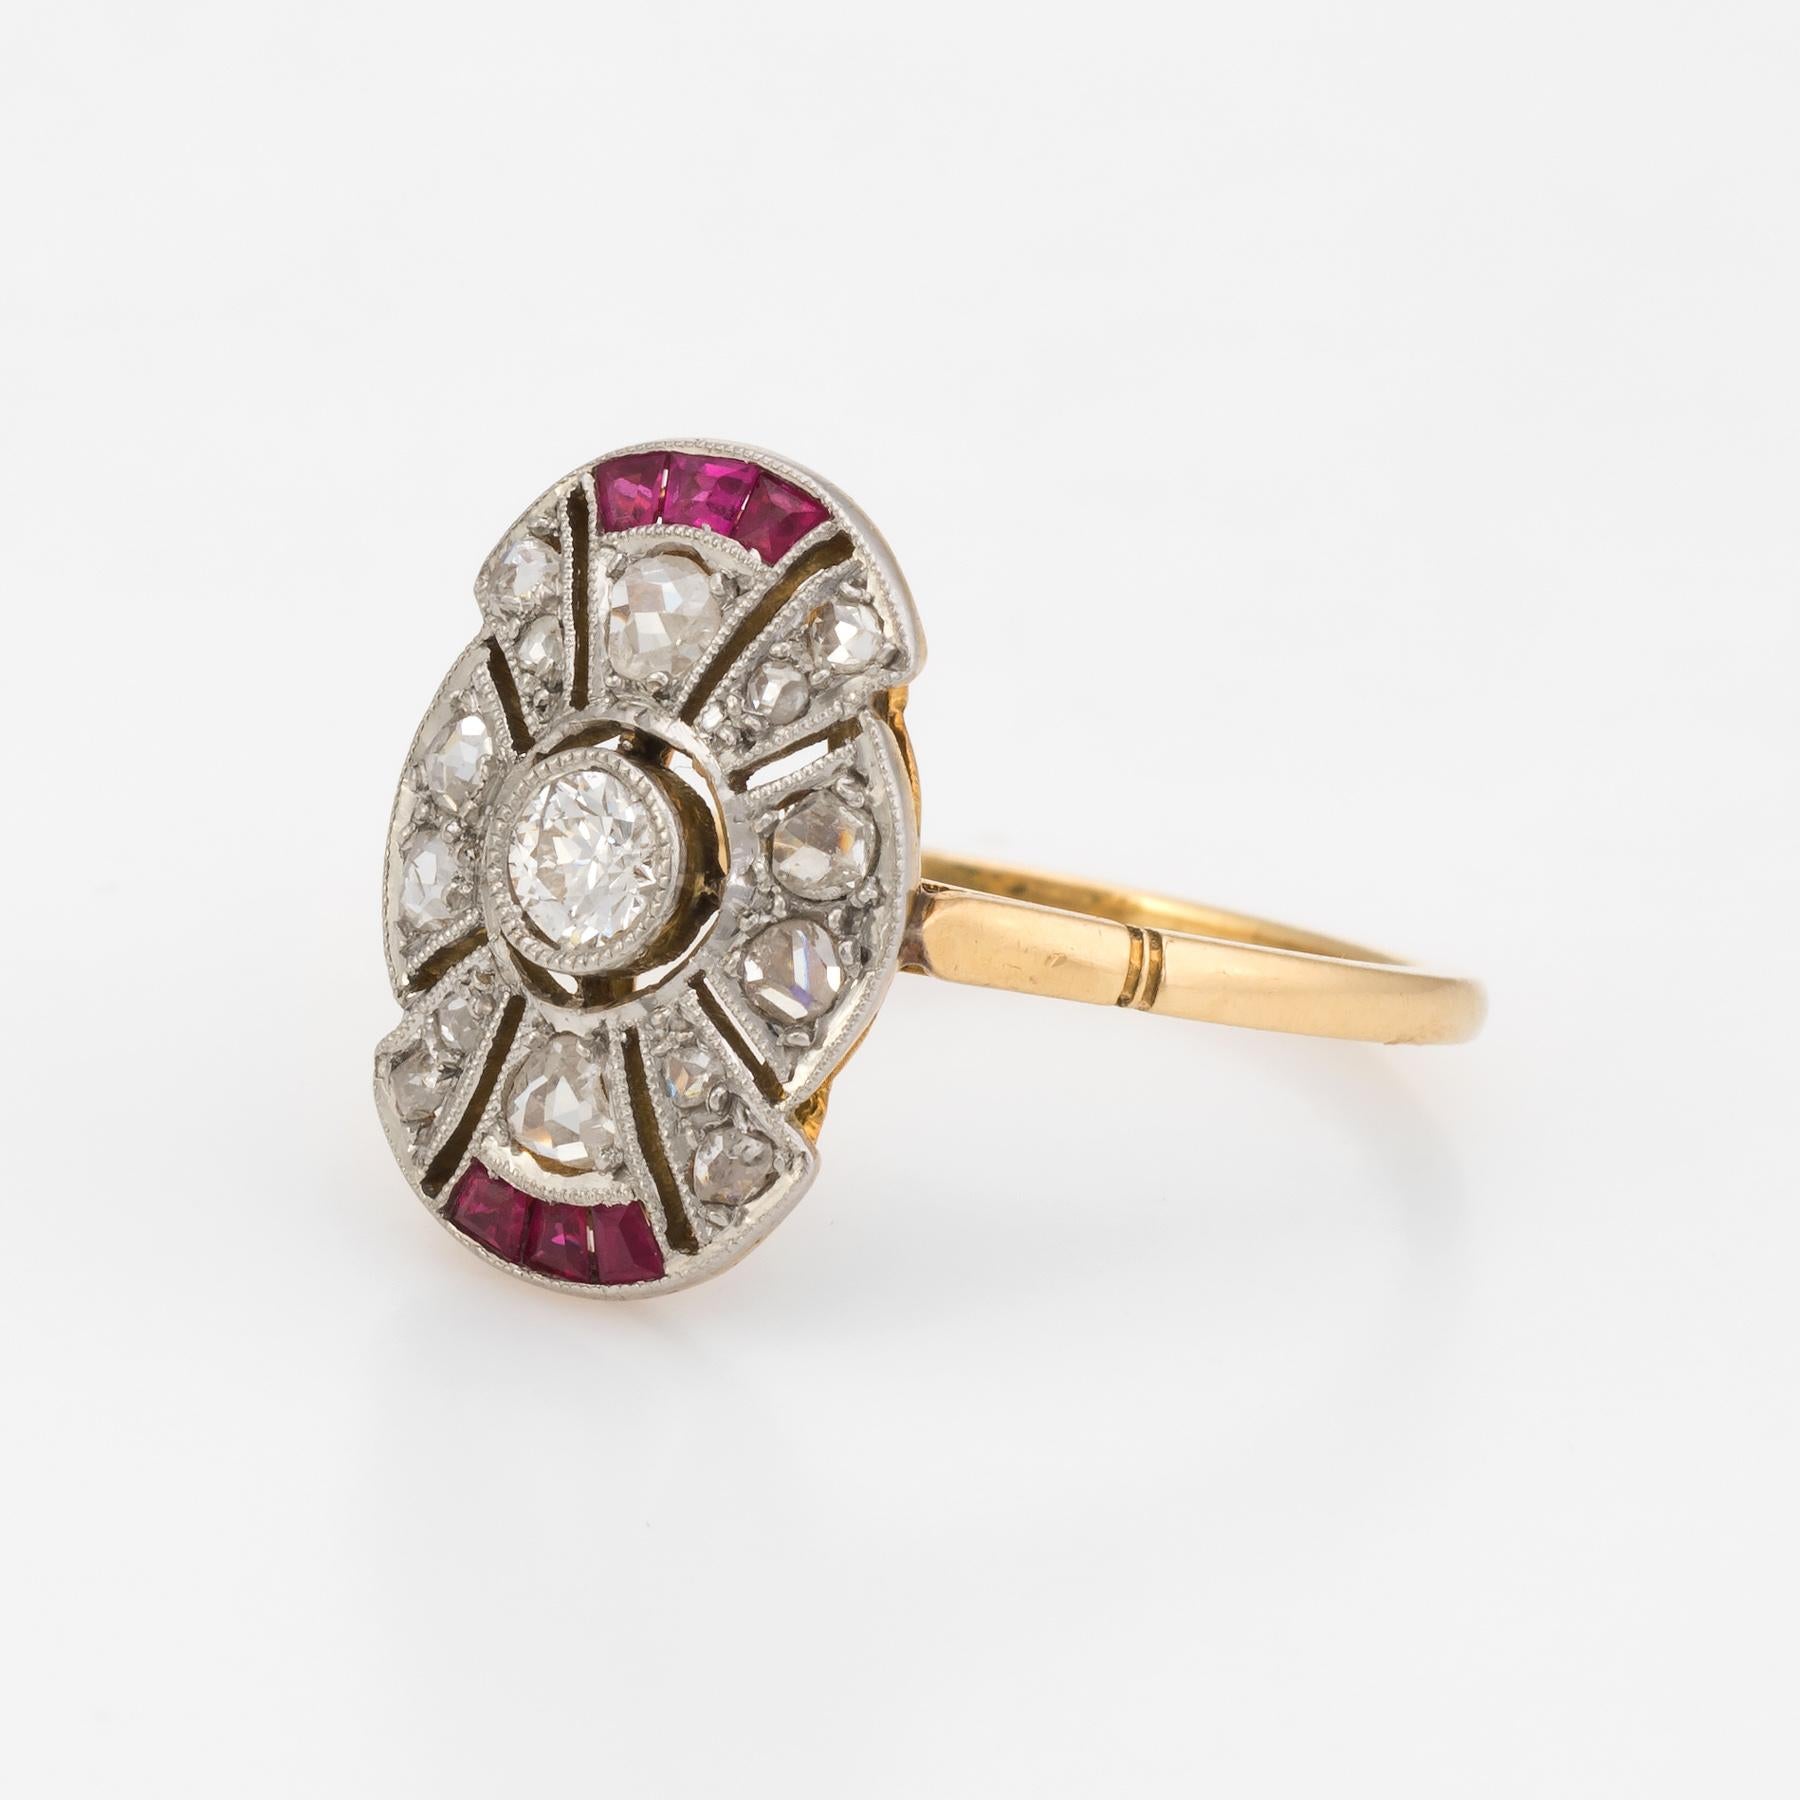 Old European Cut French Art Deco Diamond Ruby Ring Antique 18k Gold Platinum Vintage Fine Jewelry